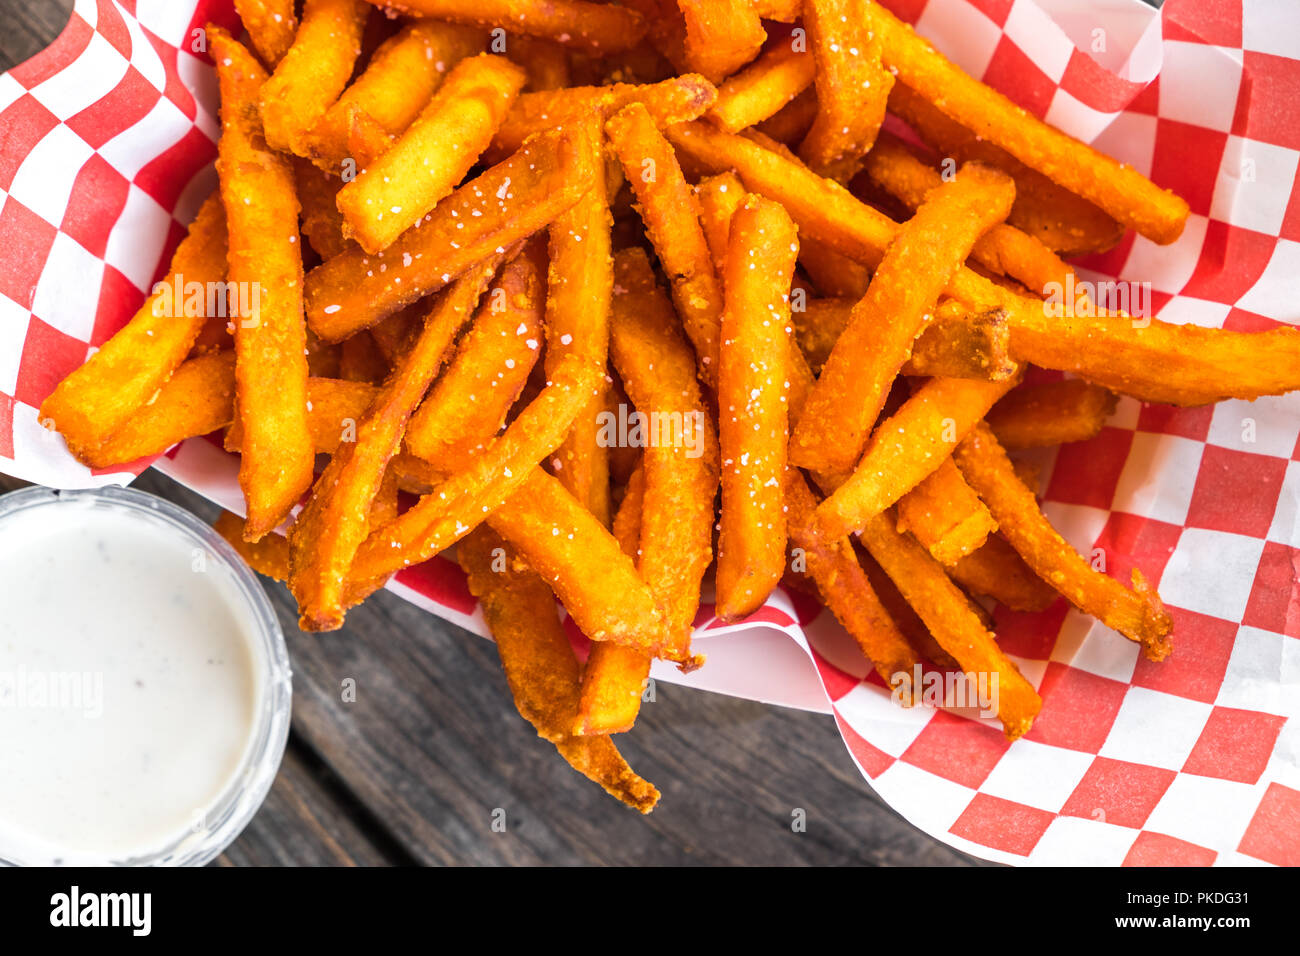 Paper basket of sweet potato fries with salt and a side of ranch dressing on rustic wooden table Stock Photo